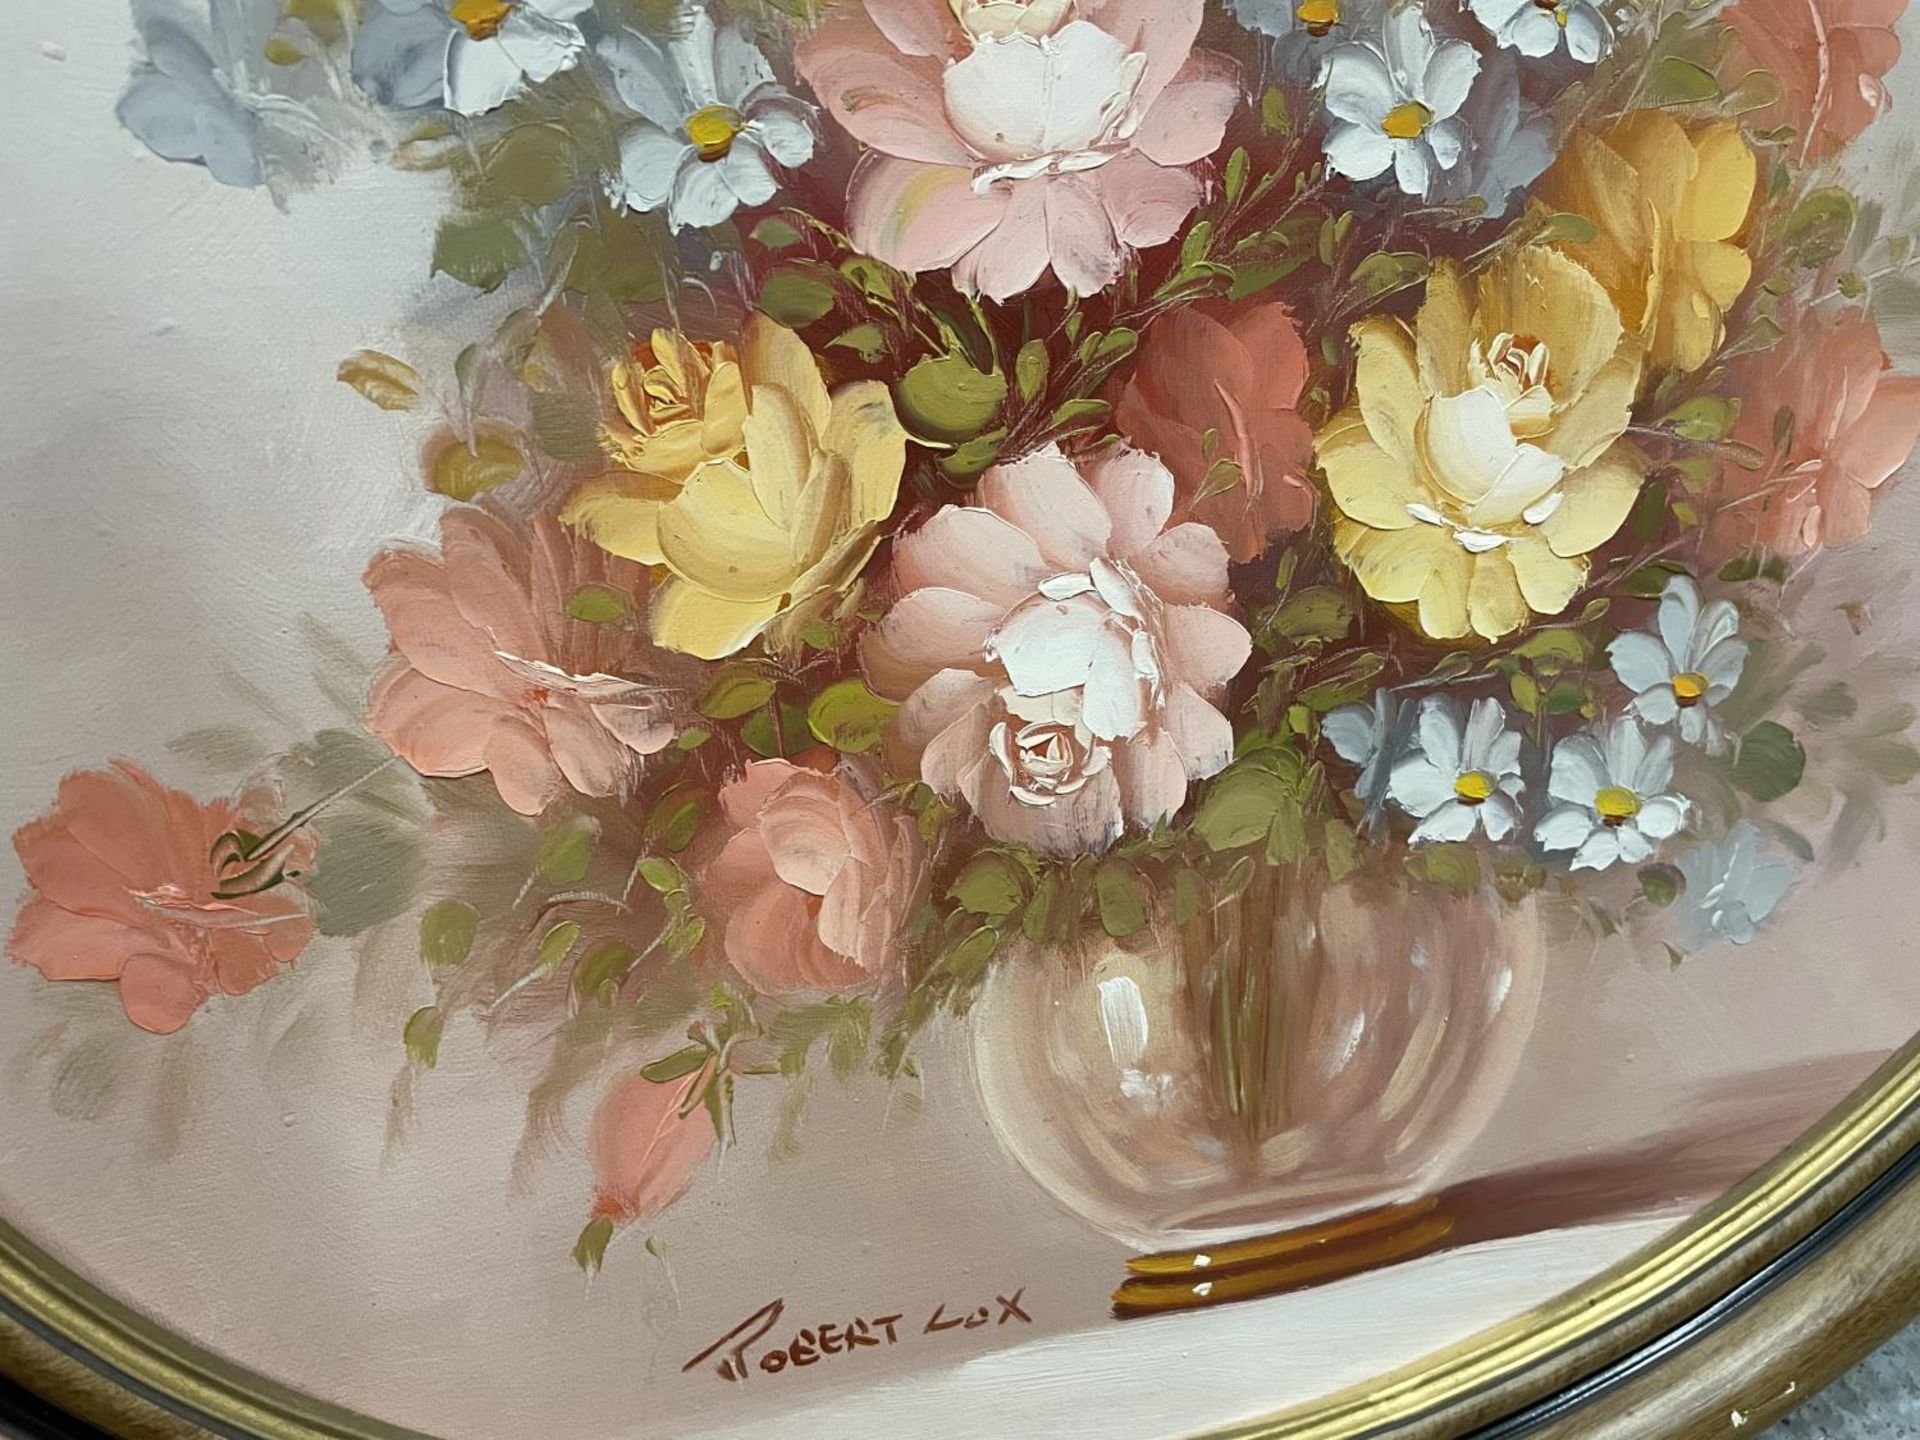 ROBERT COX (1934-2001 U.S.A.), FLOWERS IN A VASE, OVAL OIL ON CANVAS, SIGNED, 39X49CM, FRAMED - Image 2 of 3